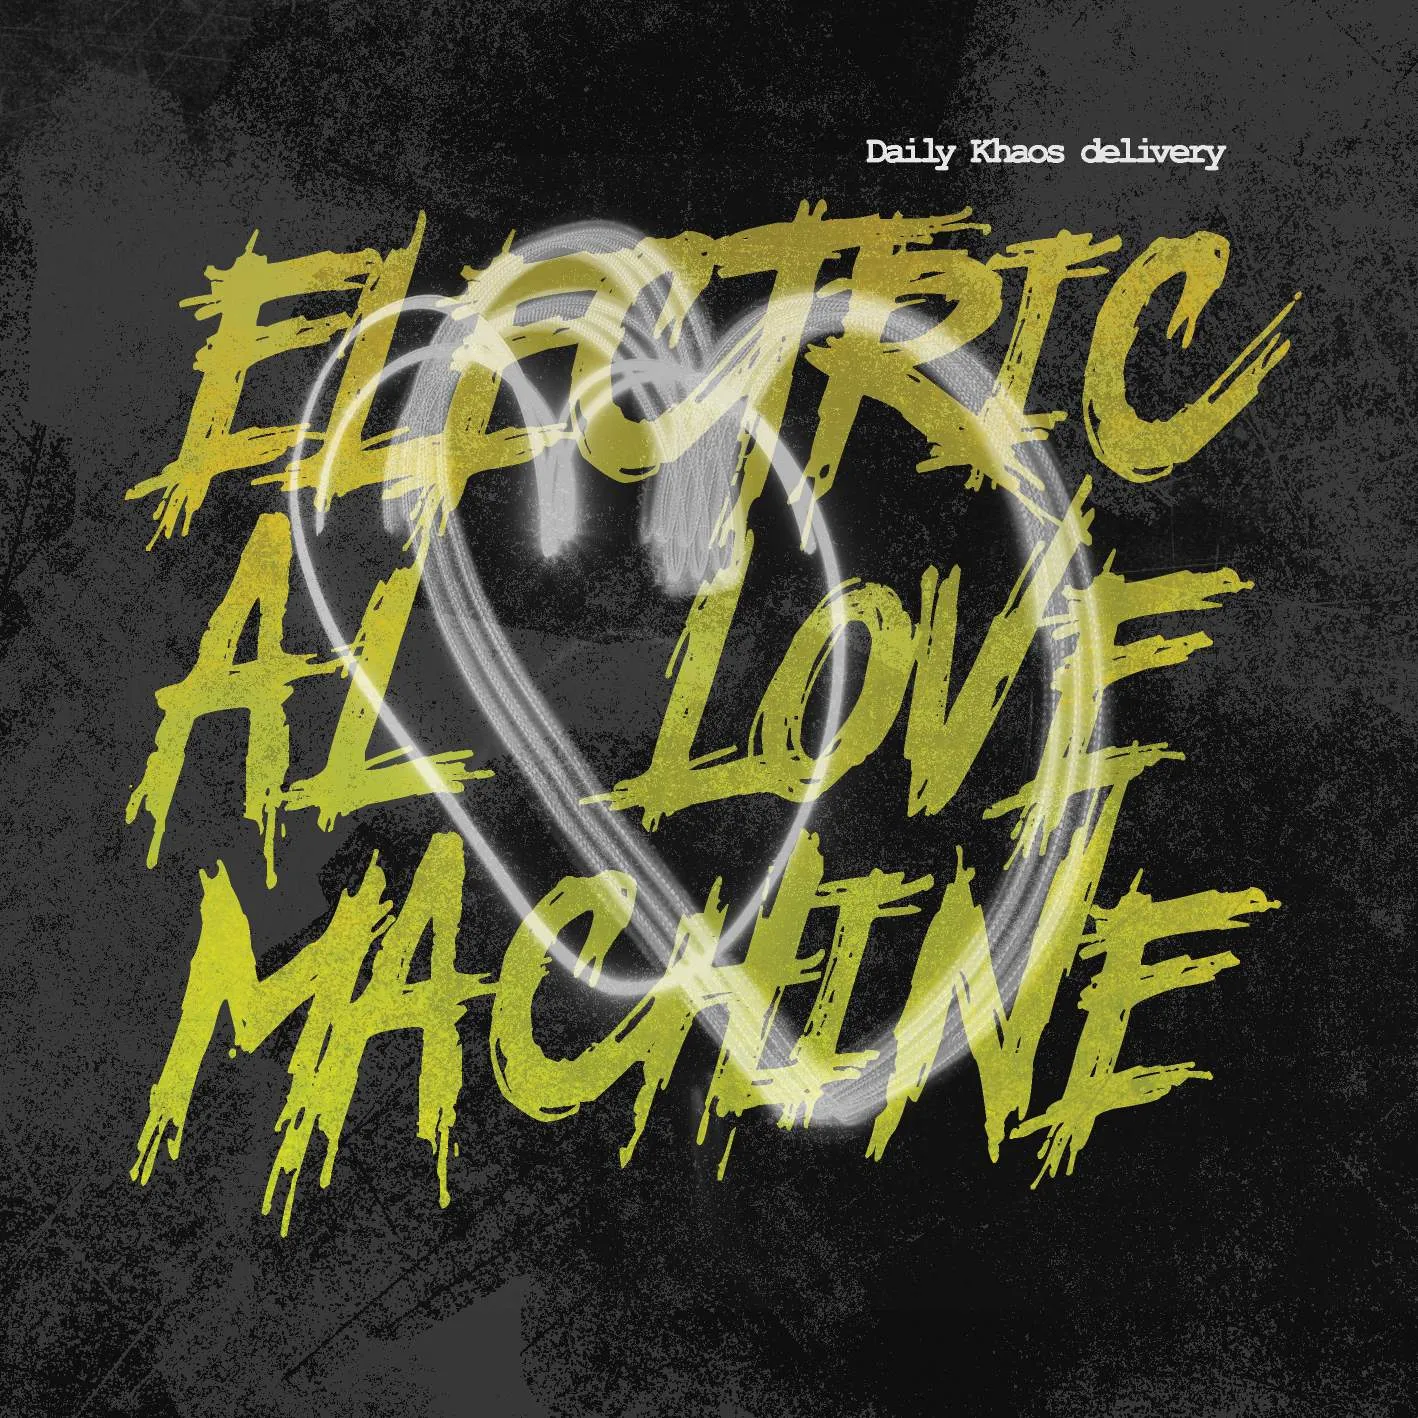 Album cover for “Electrical Love Machine” by Daily Khaos delivery